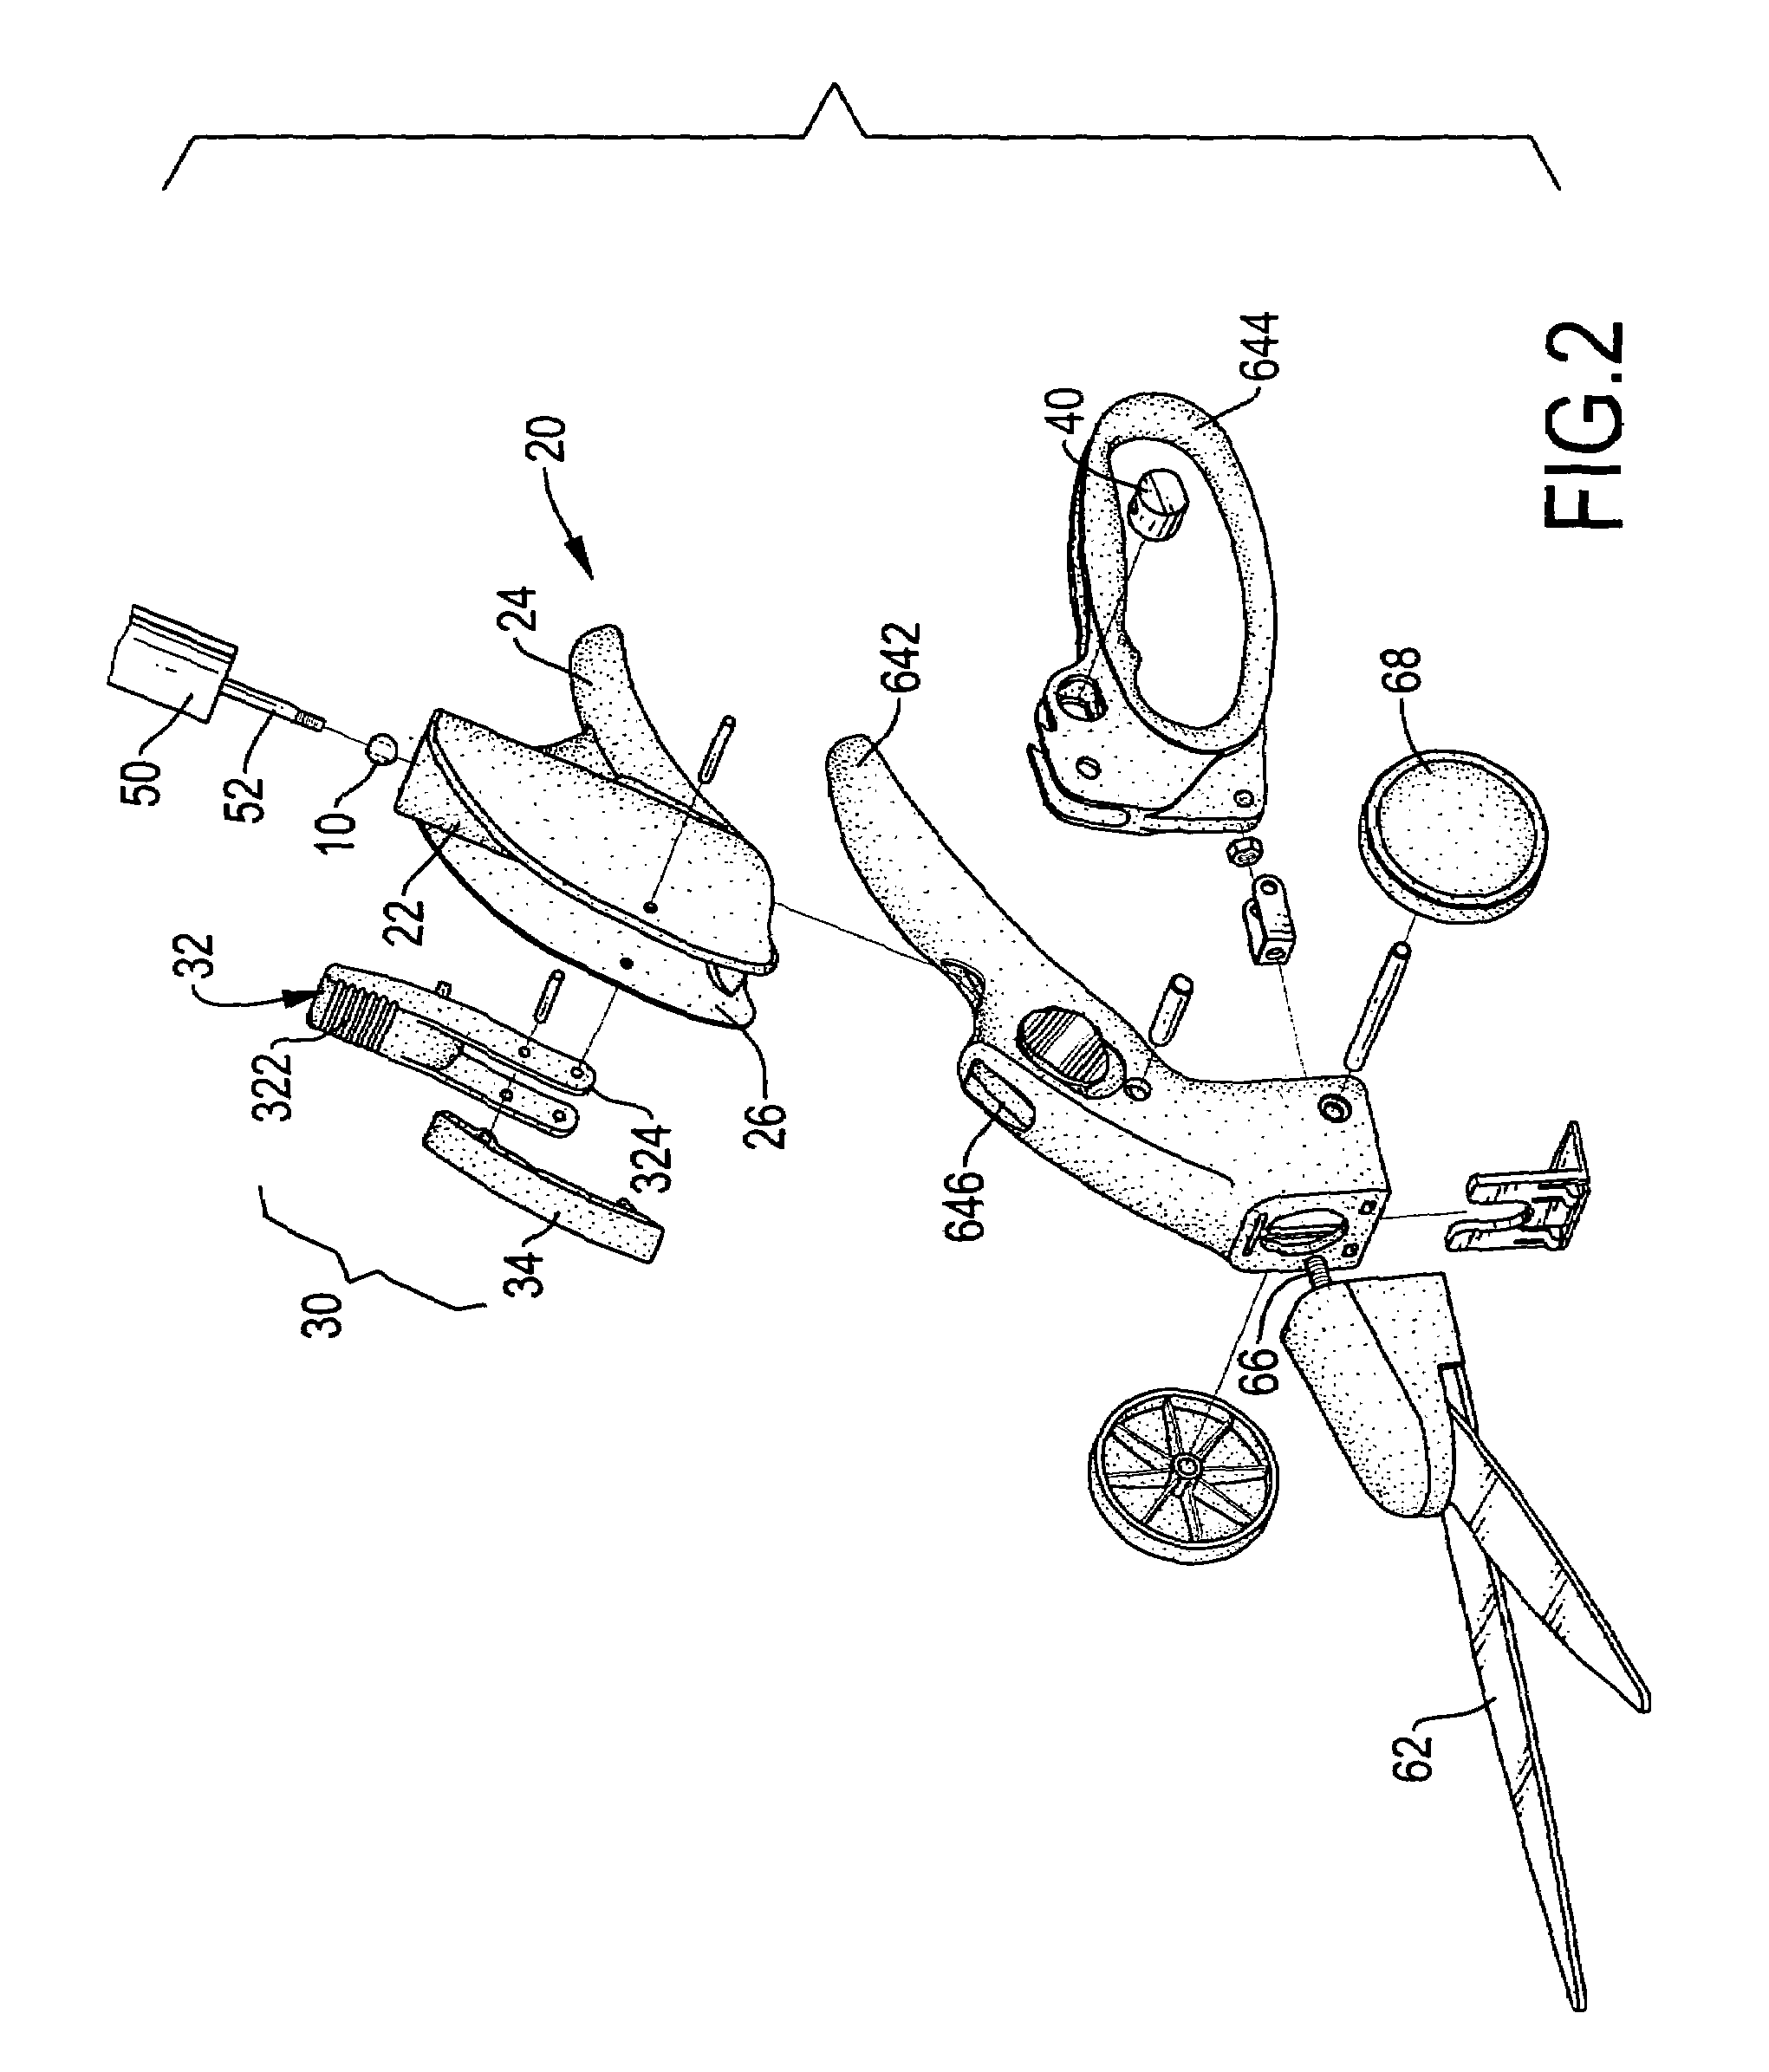 Long-handled grass shears with a detachable connecting device